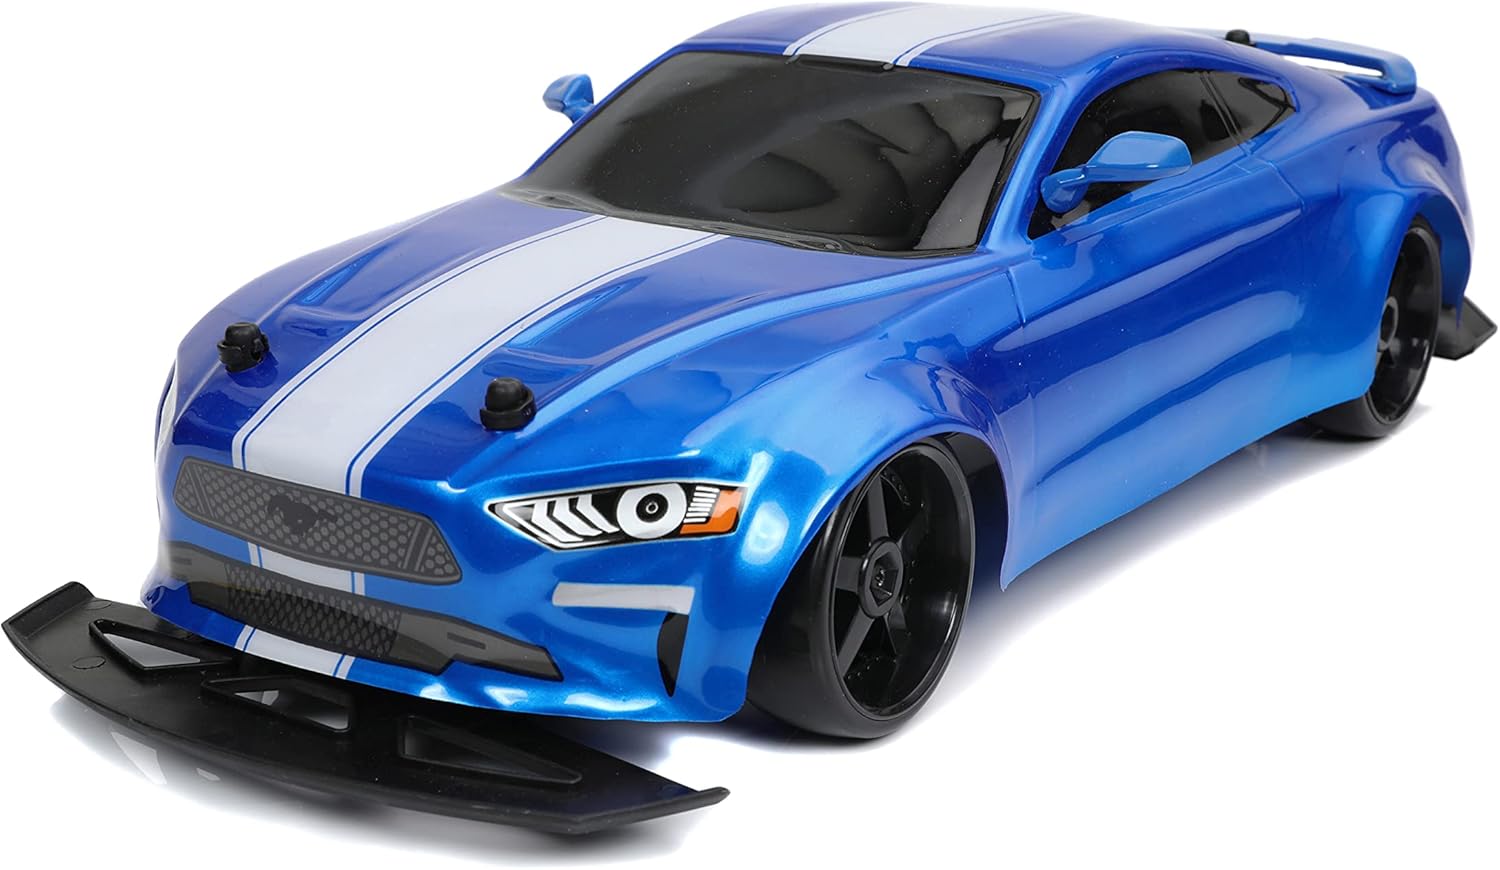 Jada Toys Fast & Furious 1:10 Jakob’s Ford Mustang GT Remote Control Car Drift RC with Extra Tires 2.4GHz Review